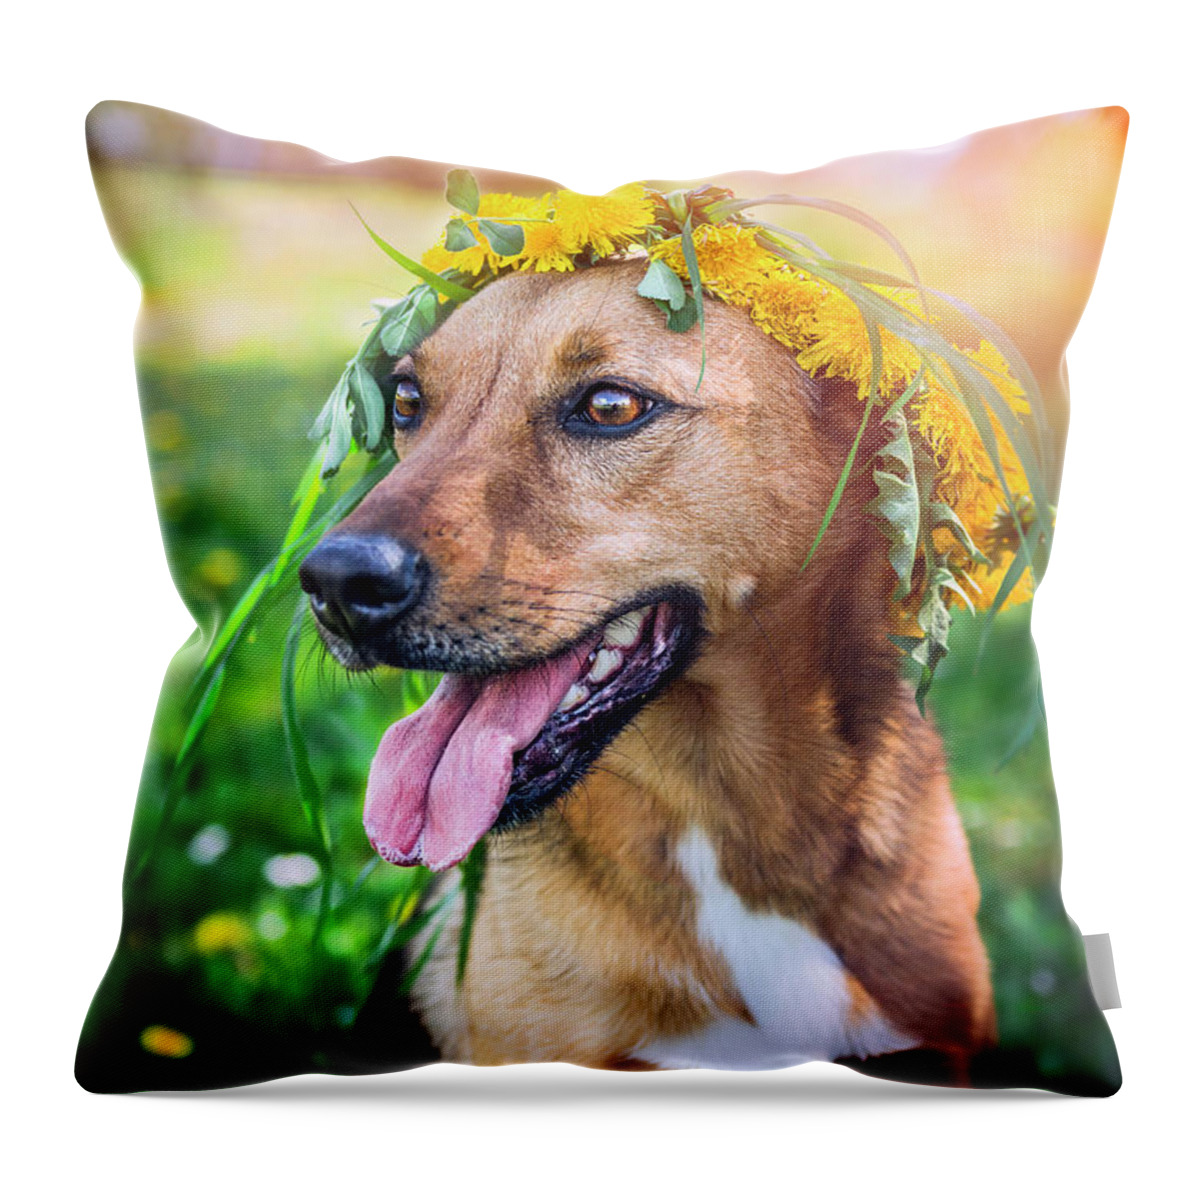 Domestic Animals Throw Pillow featuring the photograph Mixed Breed Dog In In Dandelion Hair by Vicuschka